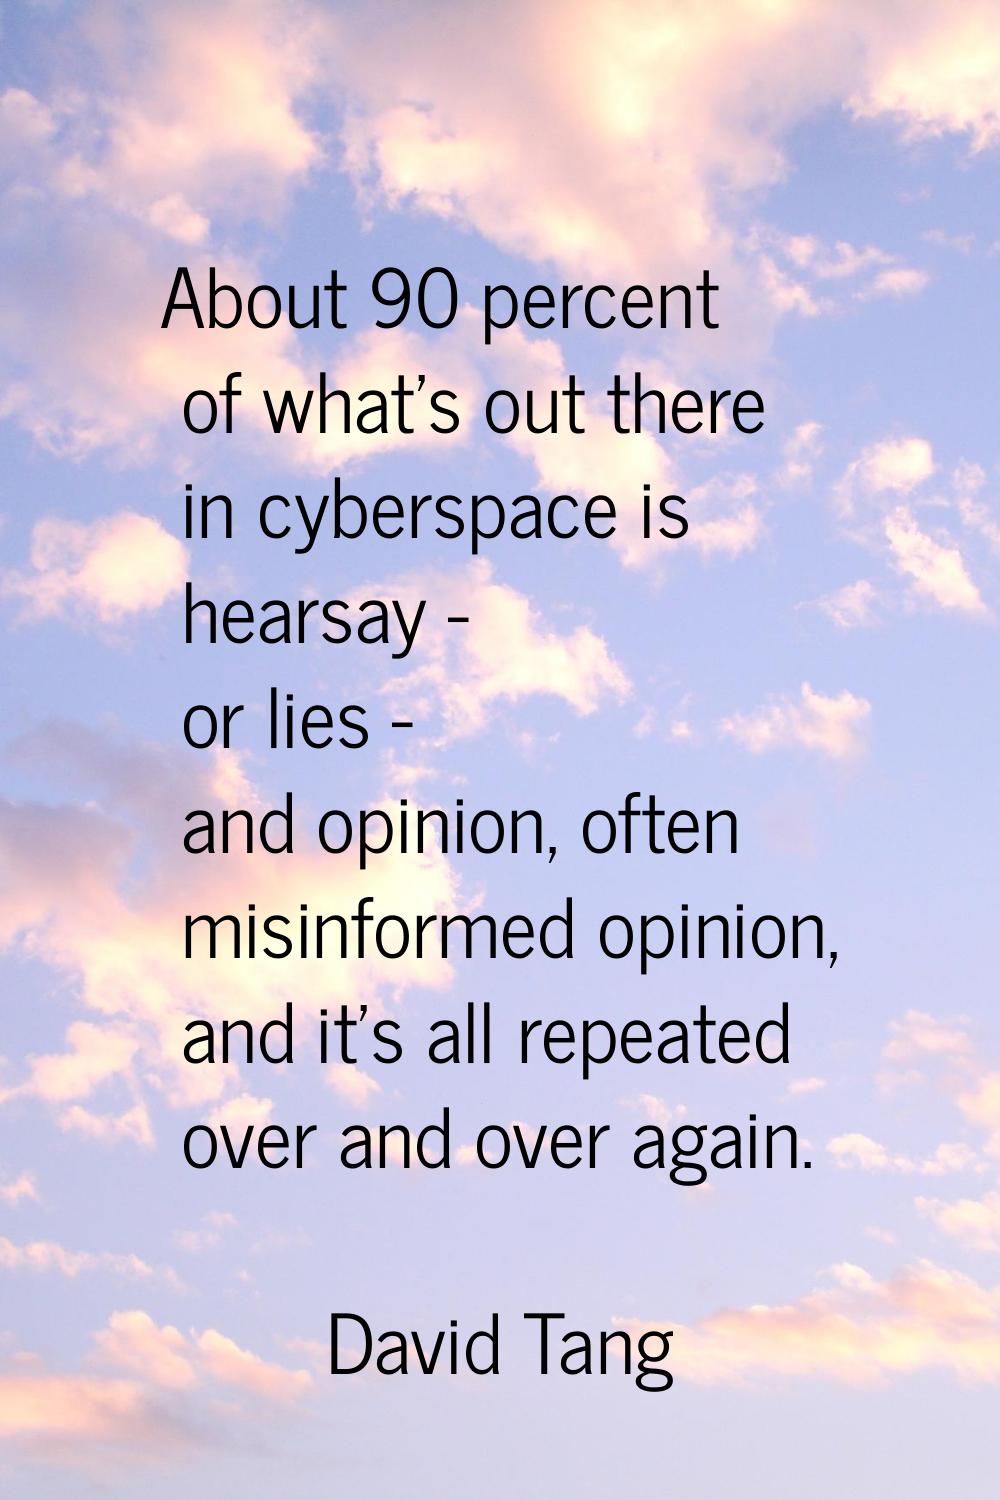 About 90 percent of what's out there in cyberspace is hearsay - or lies - and opinion, often misinf